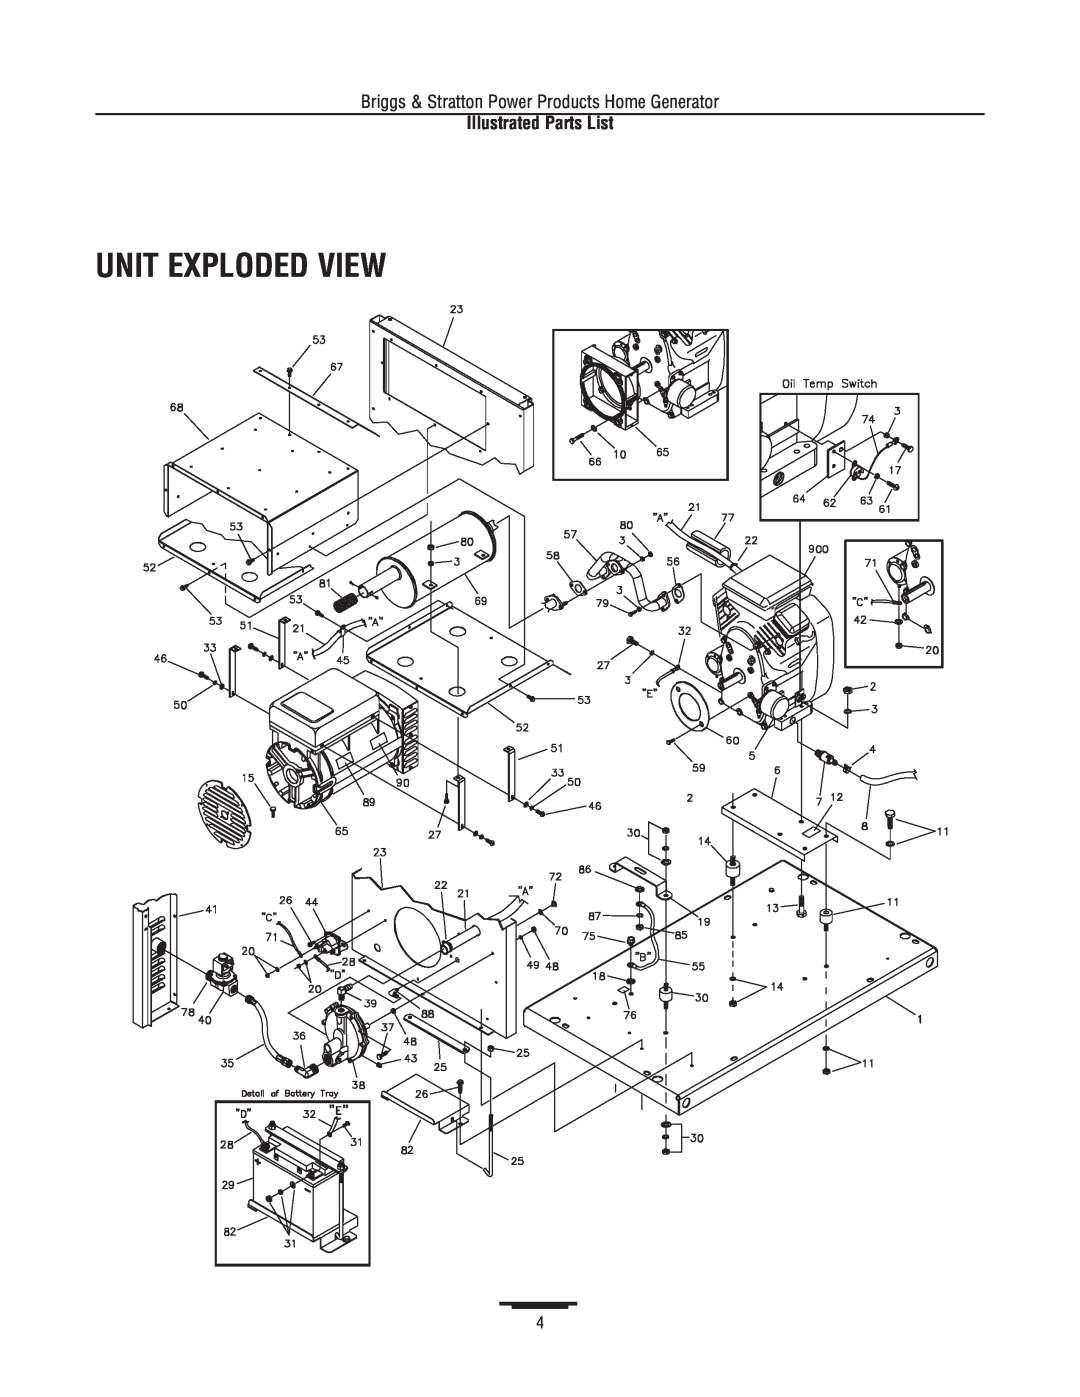 Briggs & Stratton 1815 manual Unit Exploded View, Illustrated Parts List 